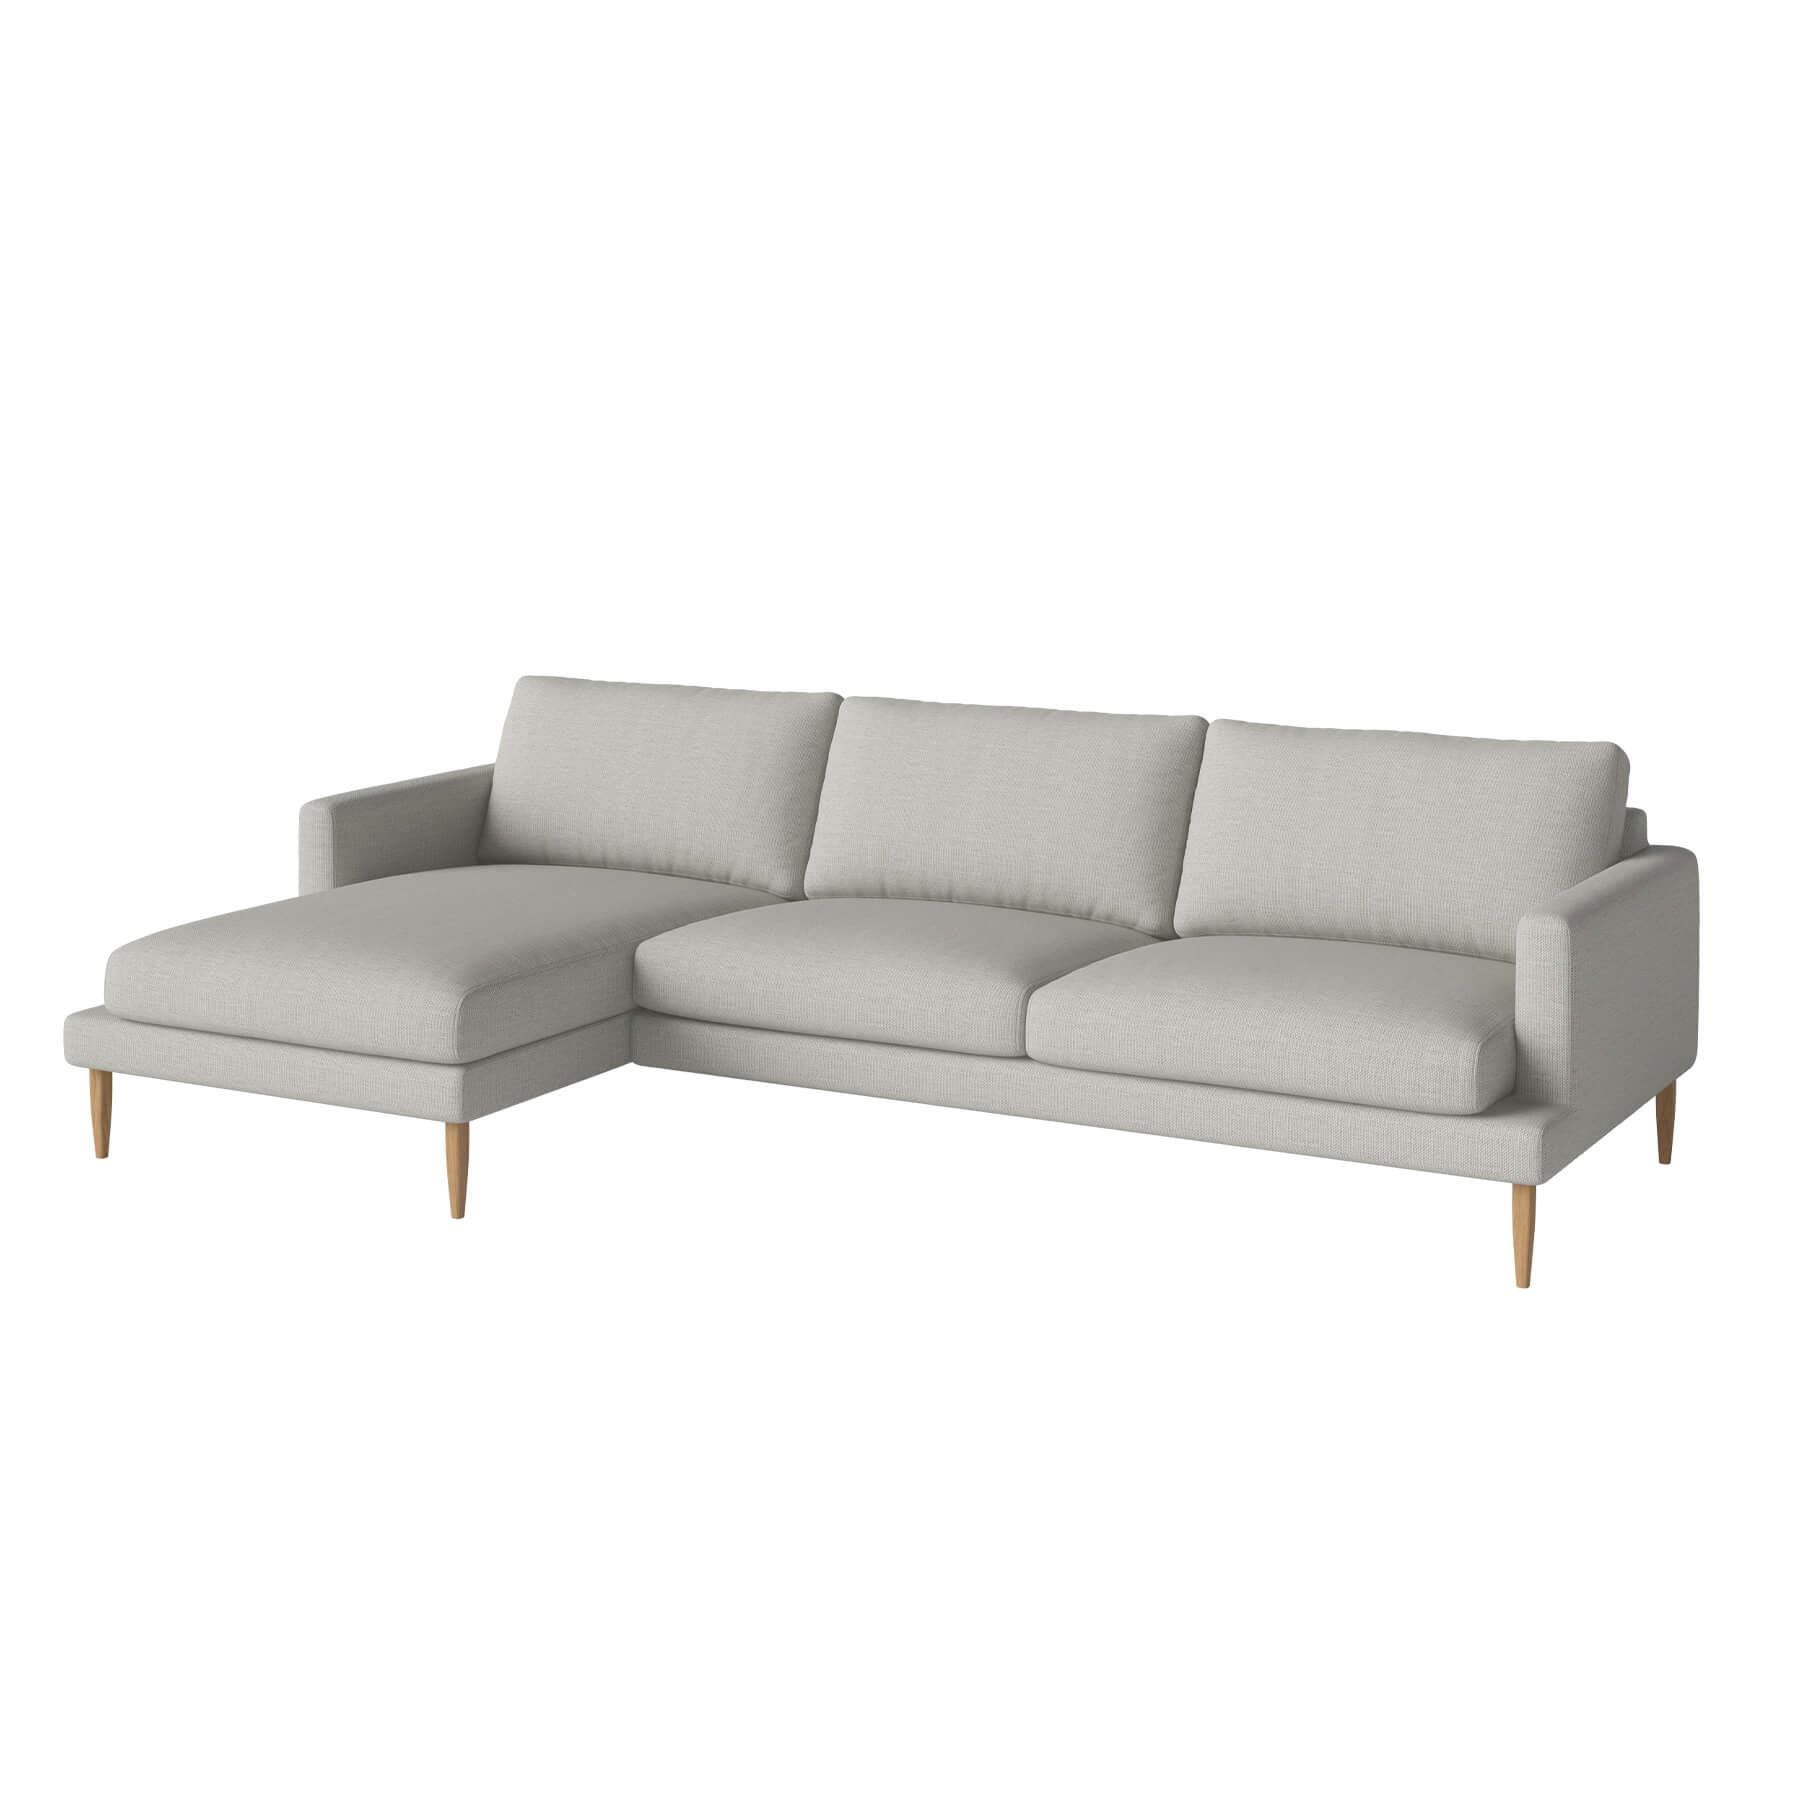 Bolia Veneda Sofa 35 Seater Sofa With Chaise Longue Oiled Oak London Dust Green Left Grey Designer Furniture From Holloways Of Ludlow